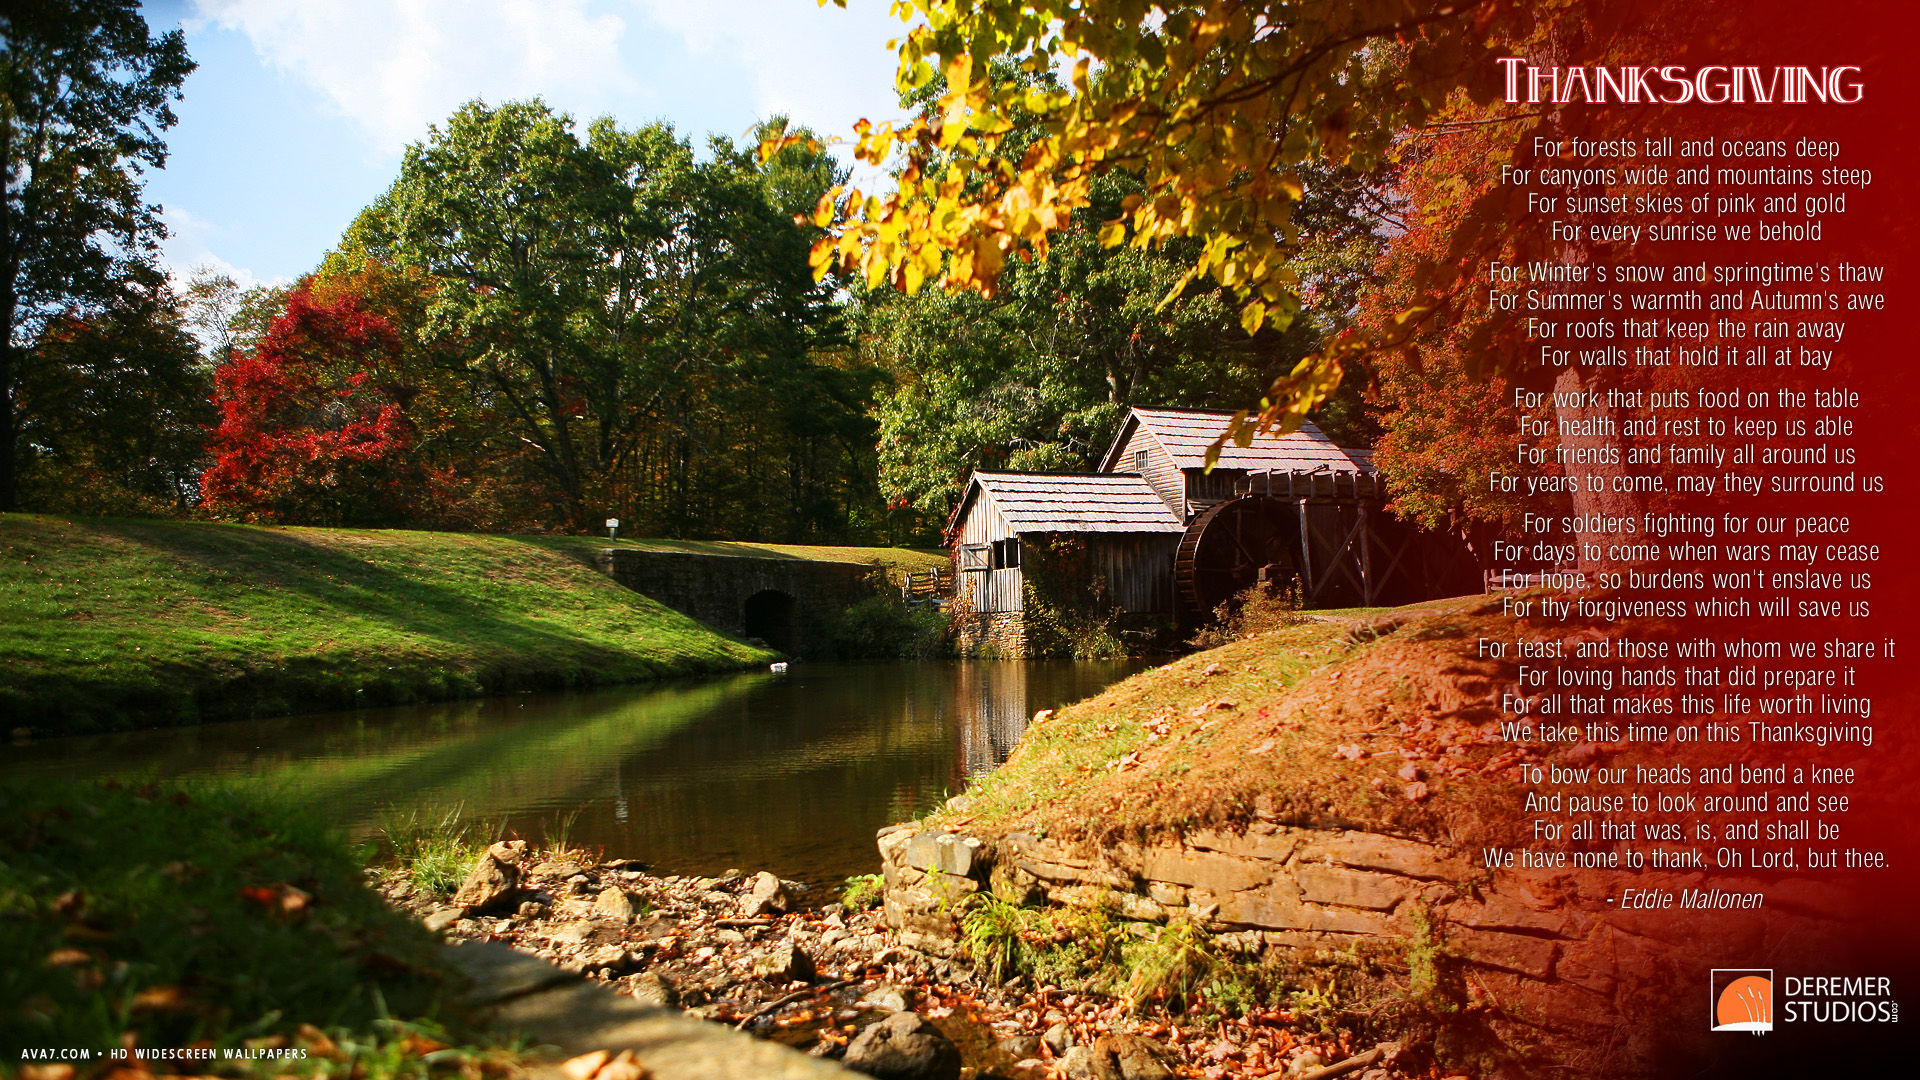 River Watermill Holiday HD Widescreen Wallpaper Holidays Background